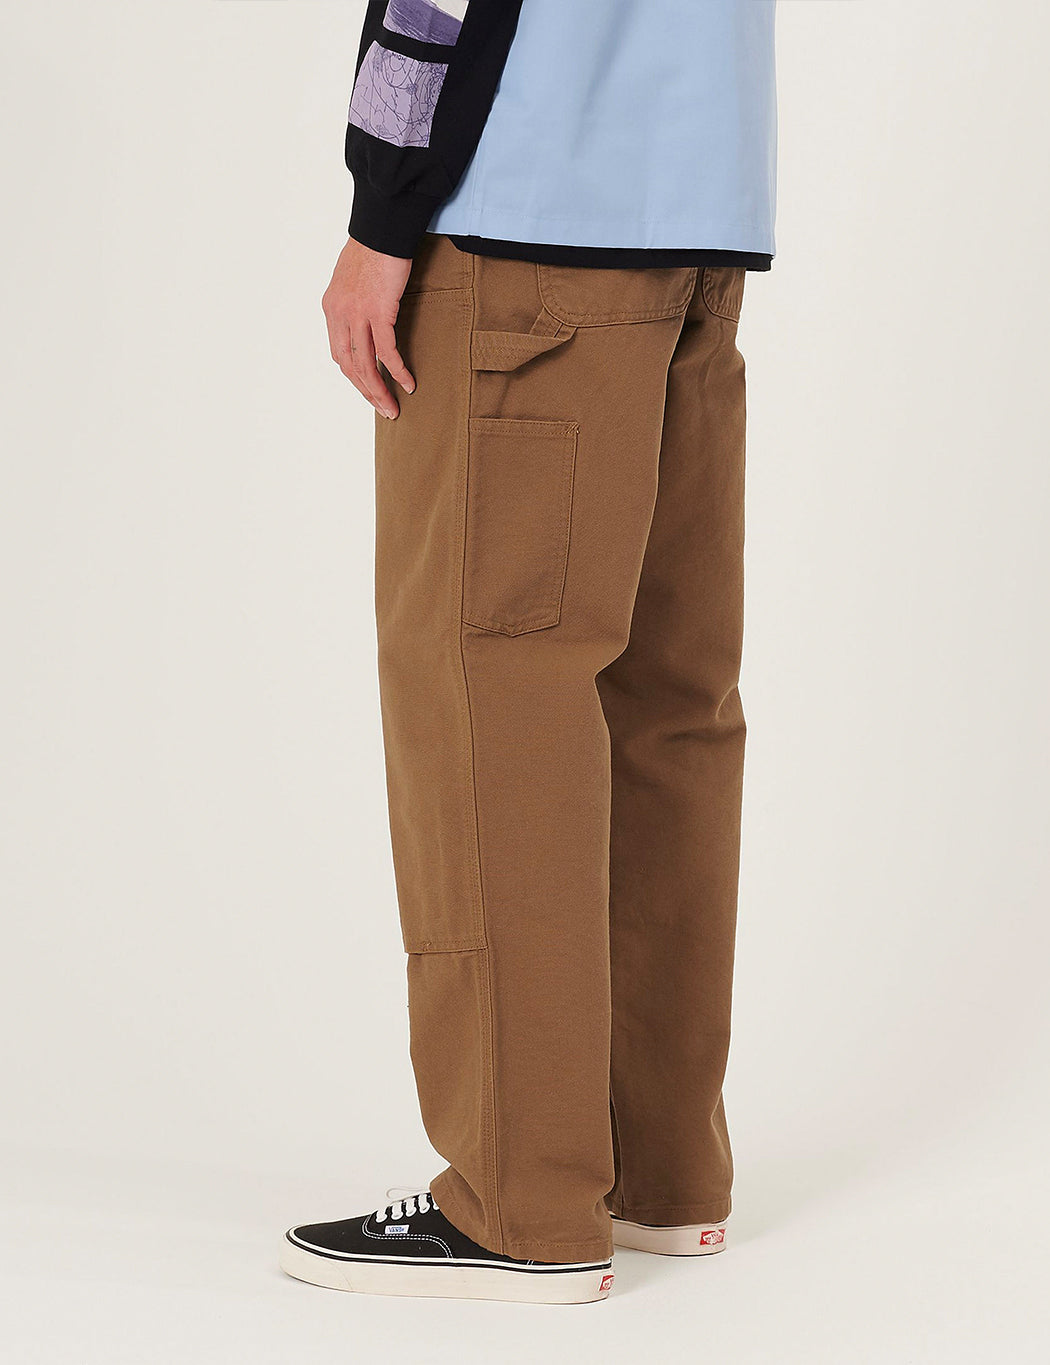 Carhartt-WIP Double Knee Pant - Hamilton Brown rinsed I URBAN EXCESS.